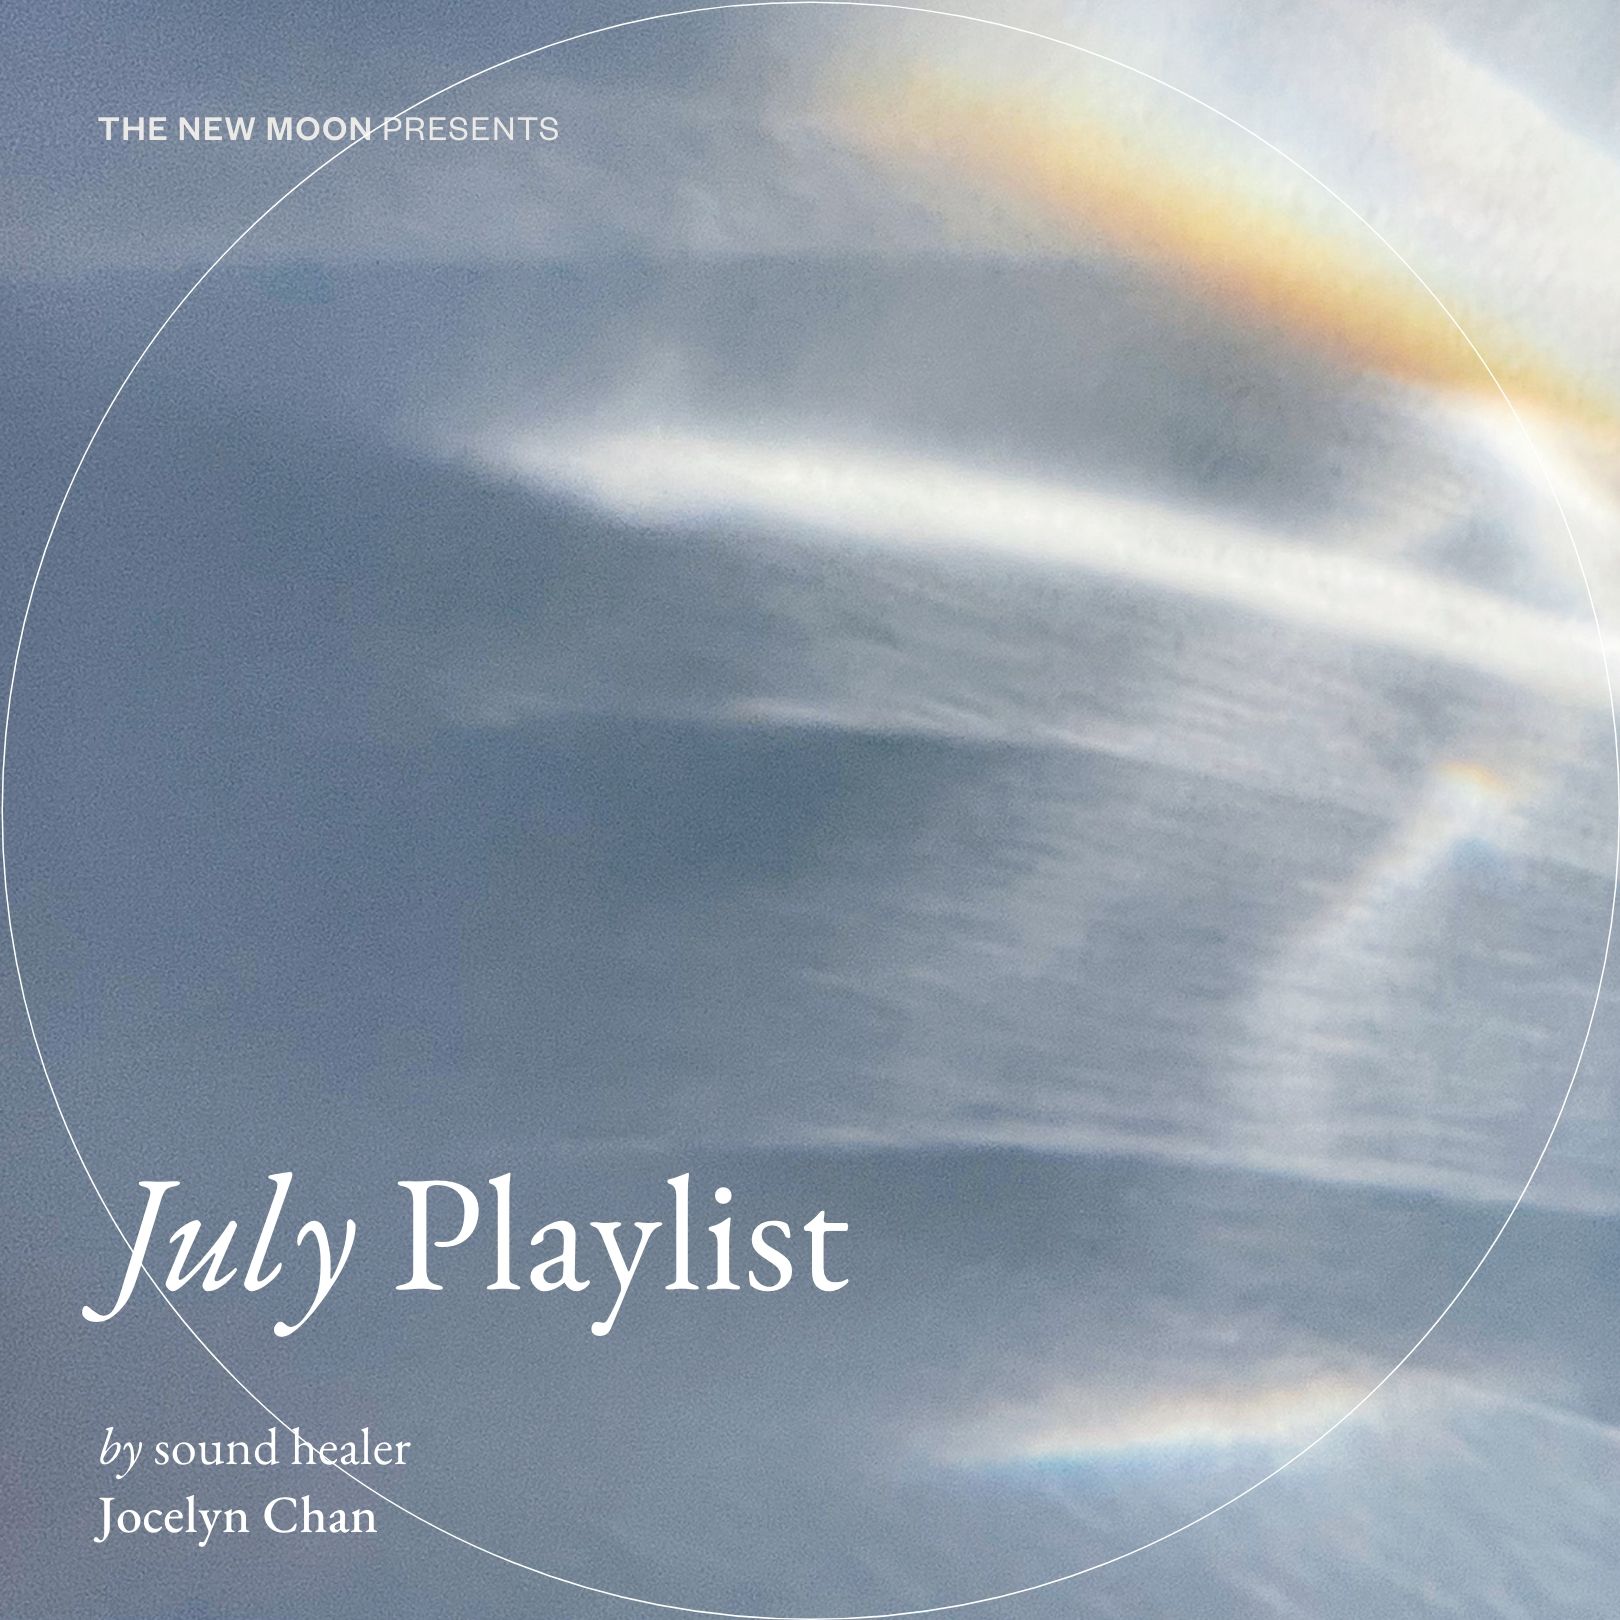 The New Moon's July Playlist by sound healer and singer-songwriter Jocelyn Chan, themed Clarity